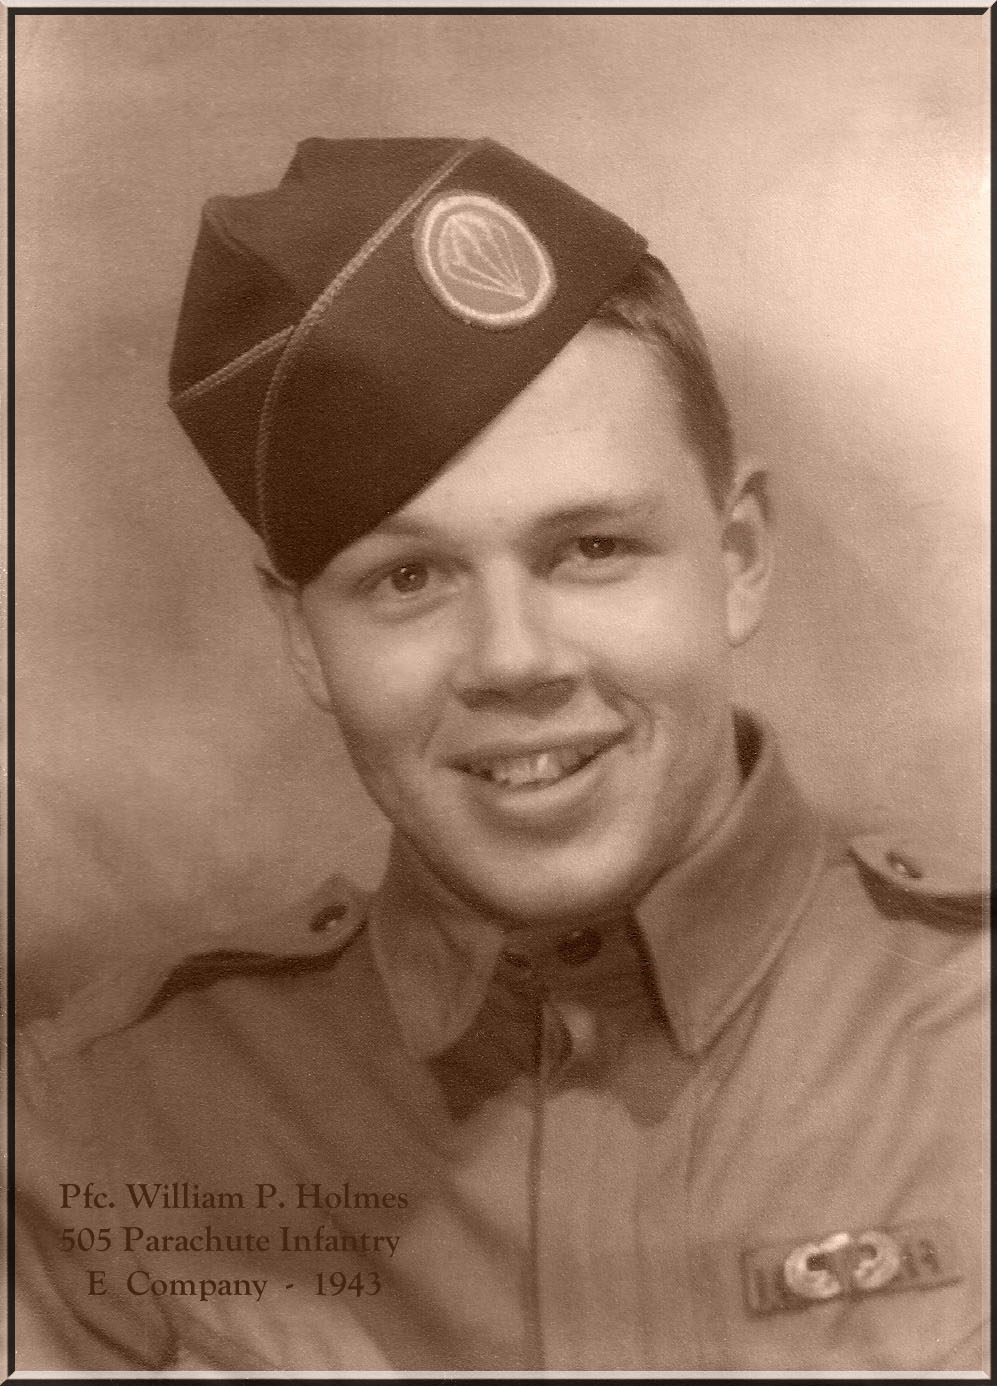 William P Holmes - E company - KIA October 23 1944 in Holland - Bronze Star with oak leaf cluster